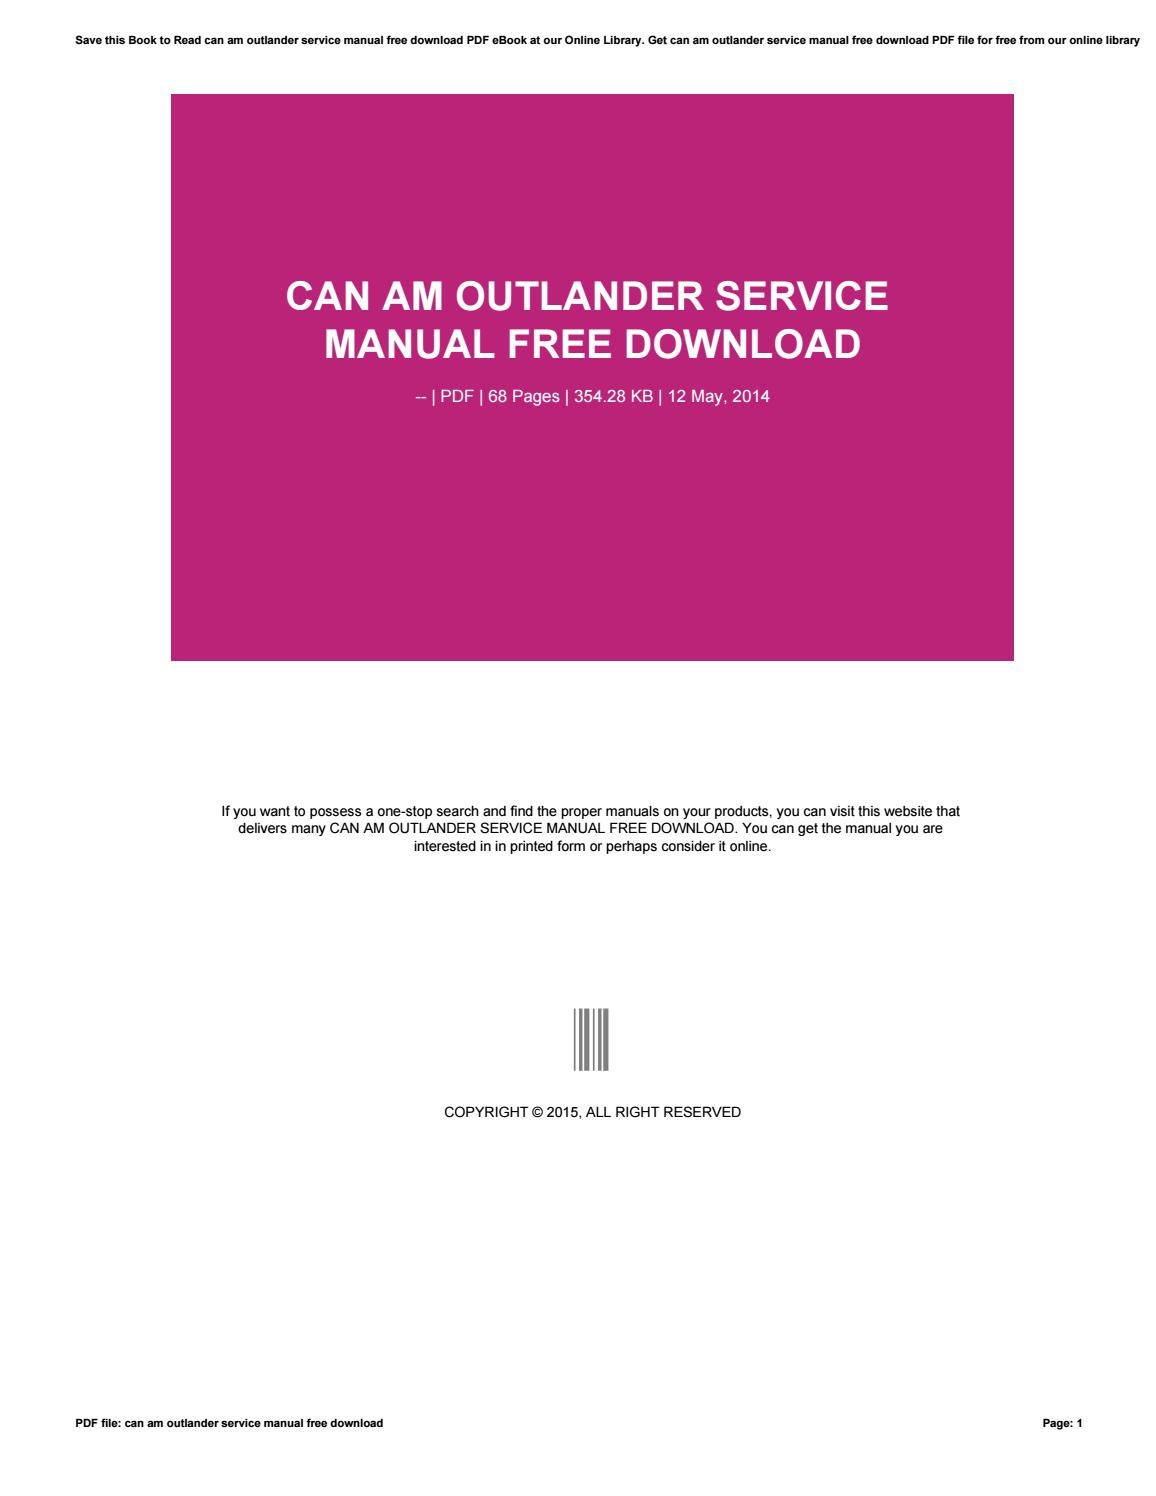 2014 can am outlander service manual free download